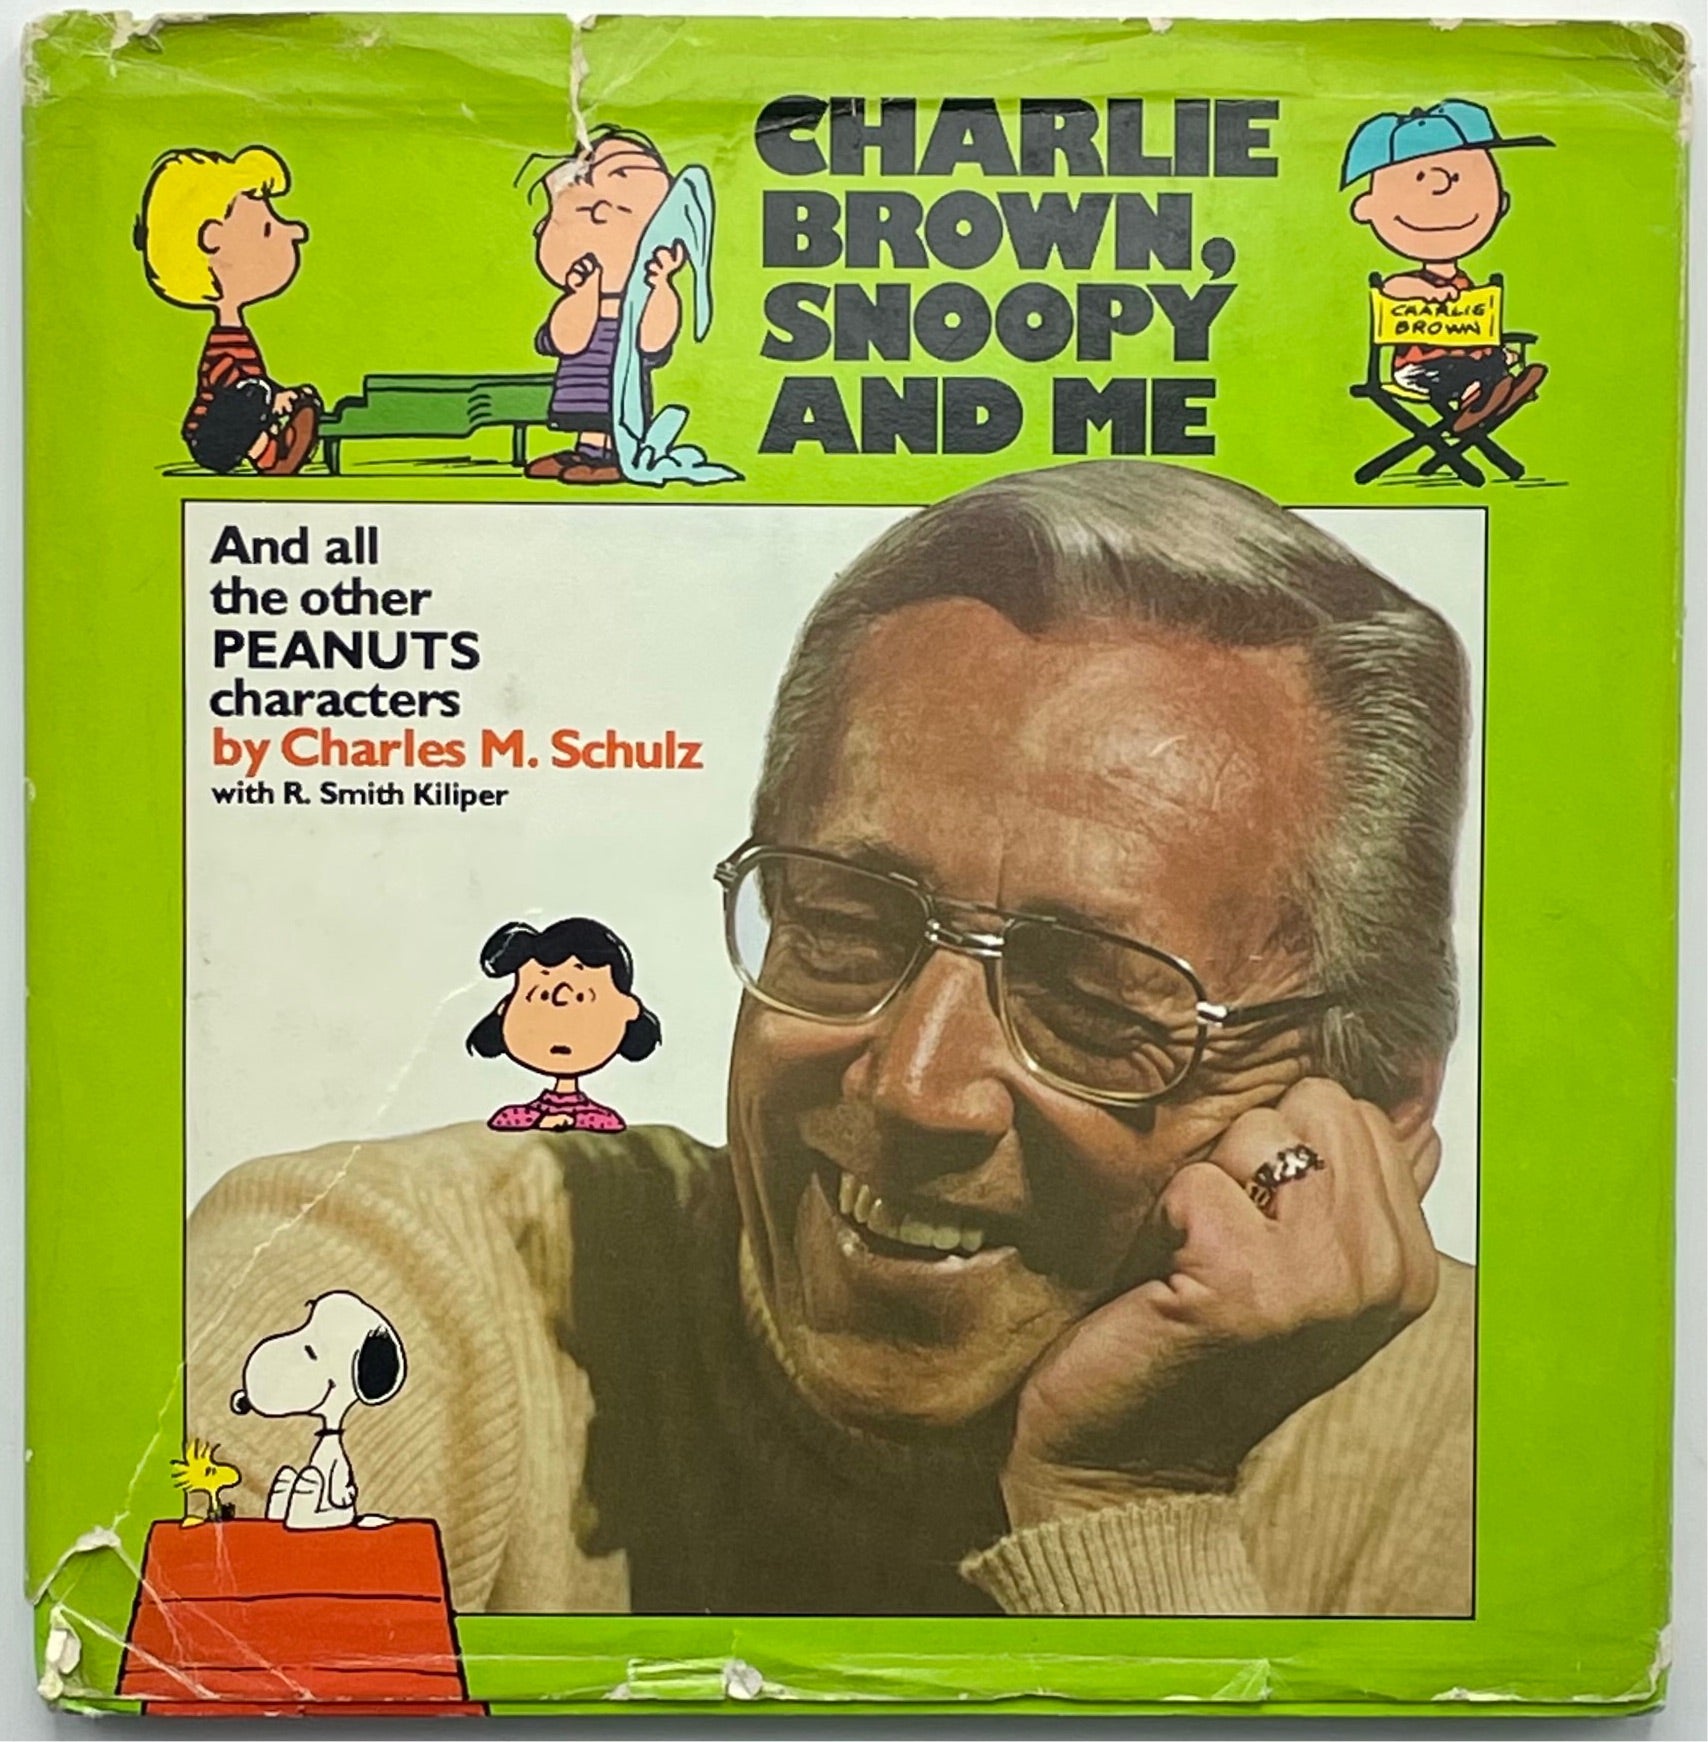 Charlie Brown, Snoopy and Me